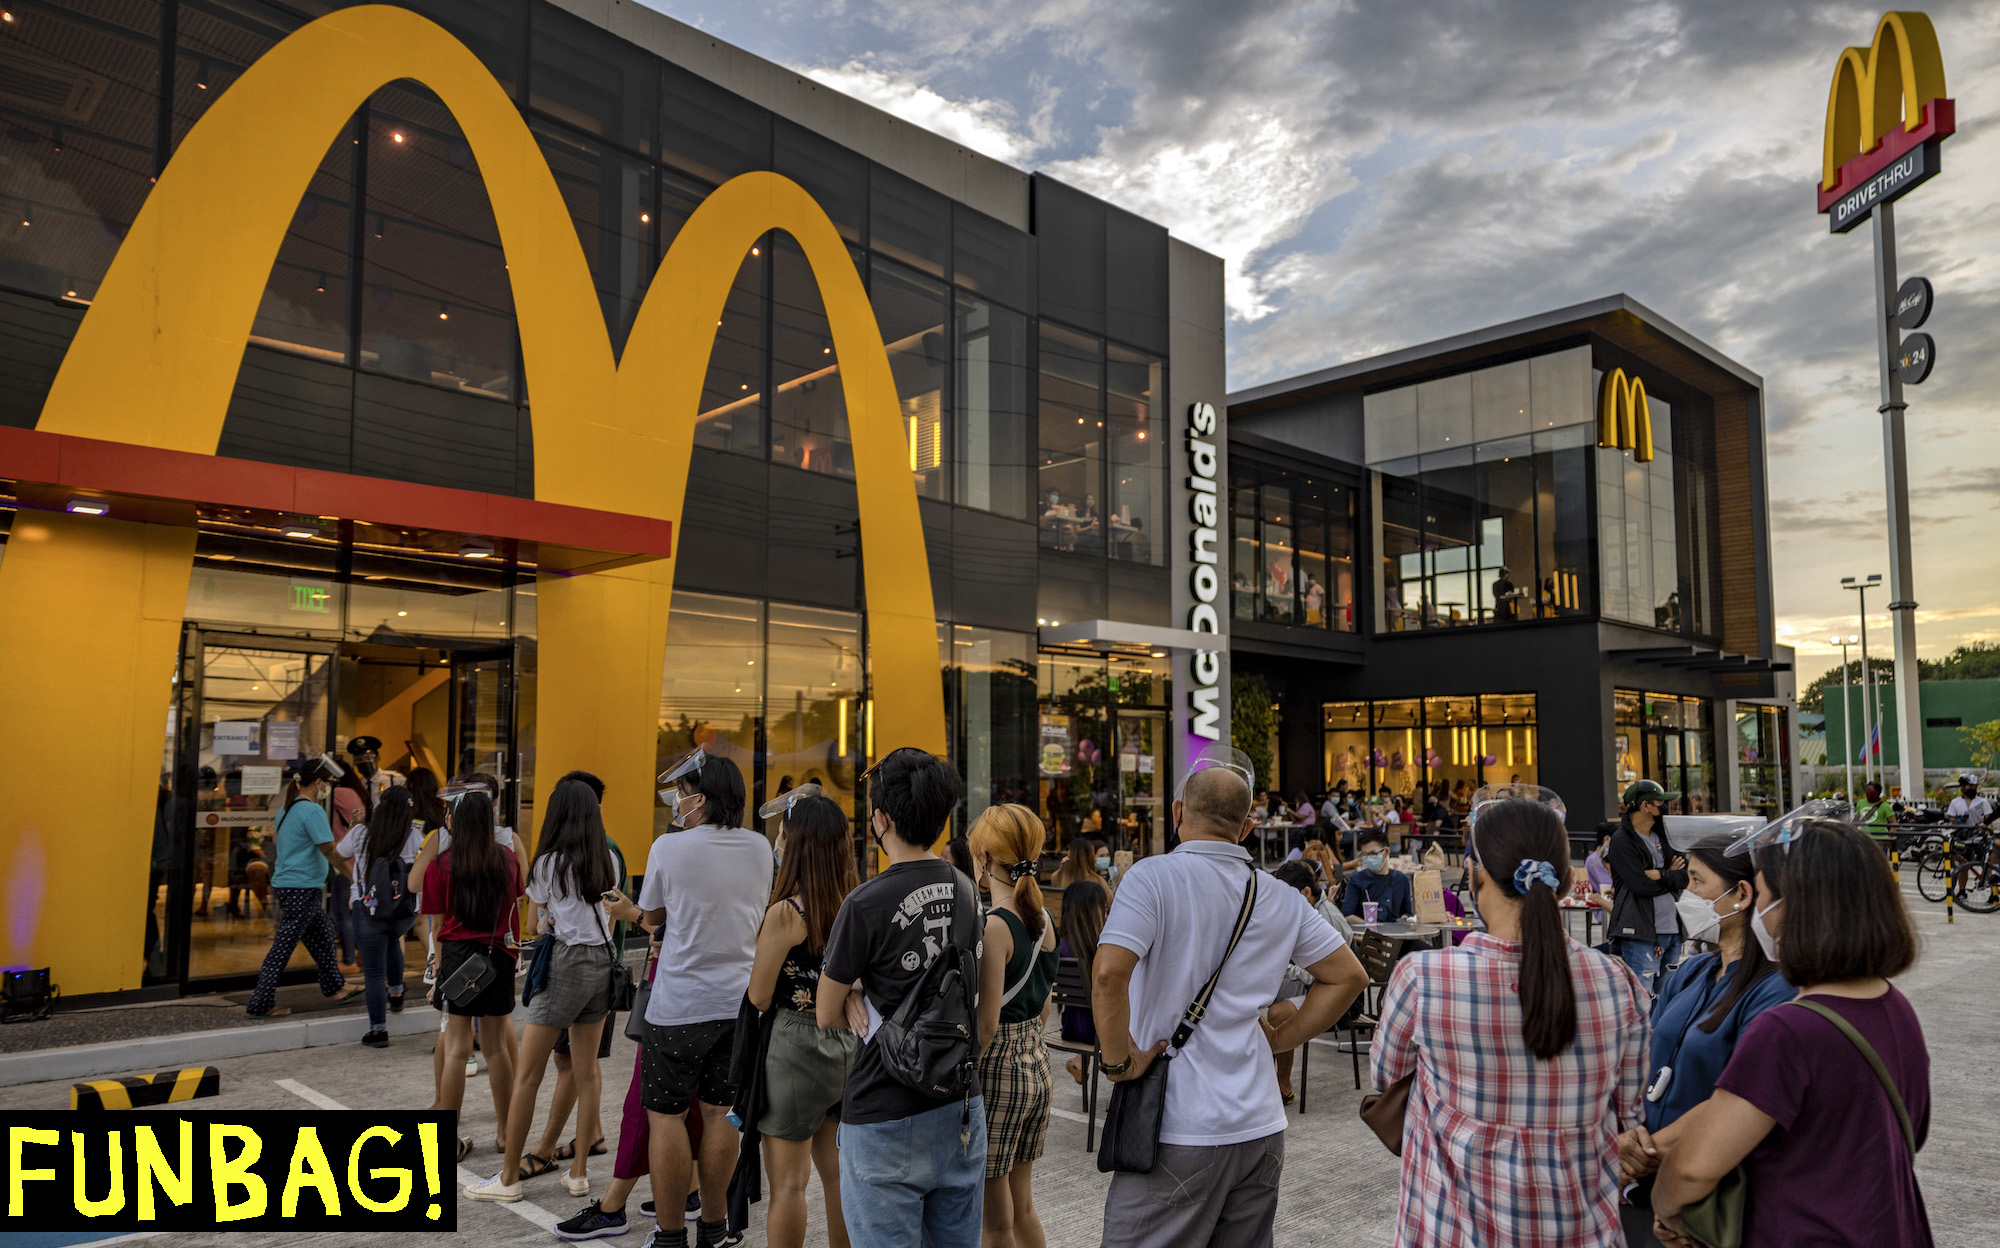 SAN FERNANDO, PHILIPPINES - JUNE 18: Customers queue at a McDonald's restaurant during the launch of the BTS Meal on June 18, 2021 in San Fernando, Pampanga province, Philippines. Long queues formed in several McDonald's restaurants in the Philippines as fans of the K-pop group BTS flocked to order the newly launched and wildly popular BTS themed meals. The limited edition celebrity meal "BTS Meal", a collaboration between the fastfood giant and BTS, will be made available in 49 countries. (Photo by Ezra Acayan/Getty Images)